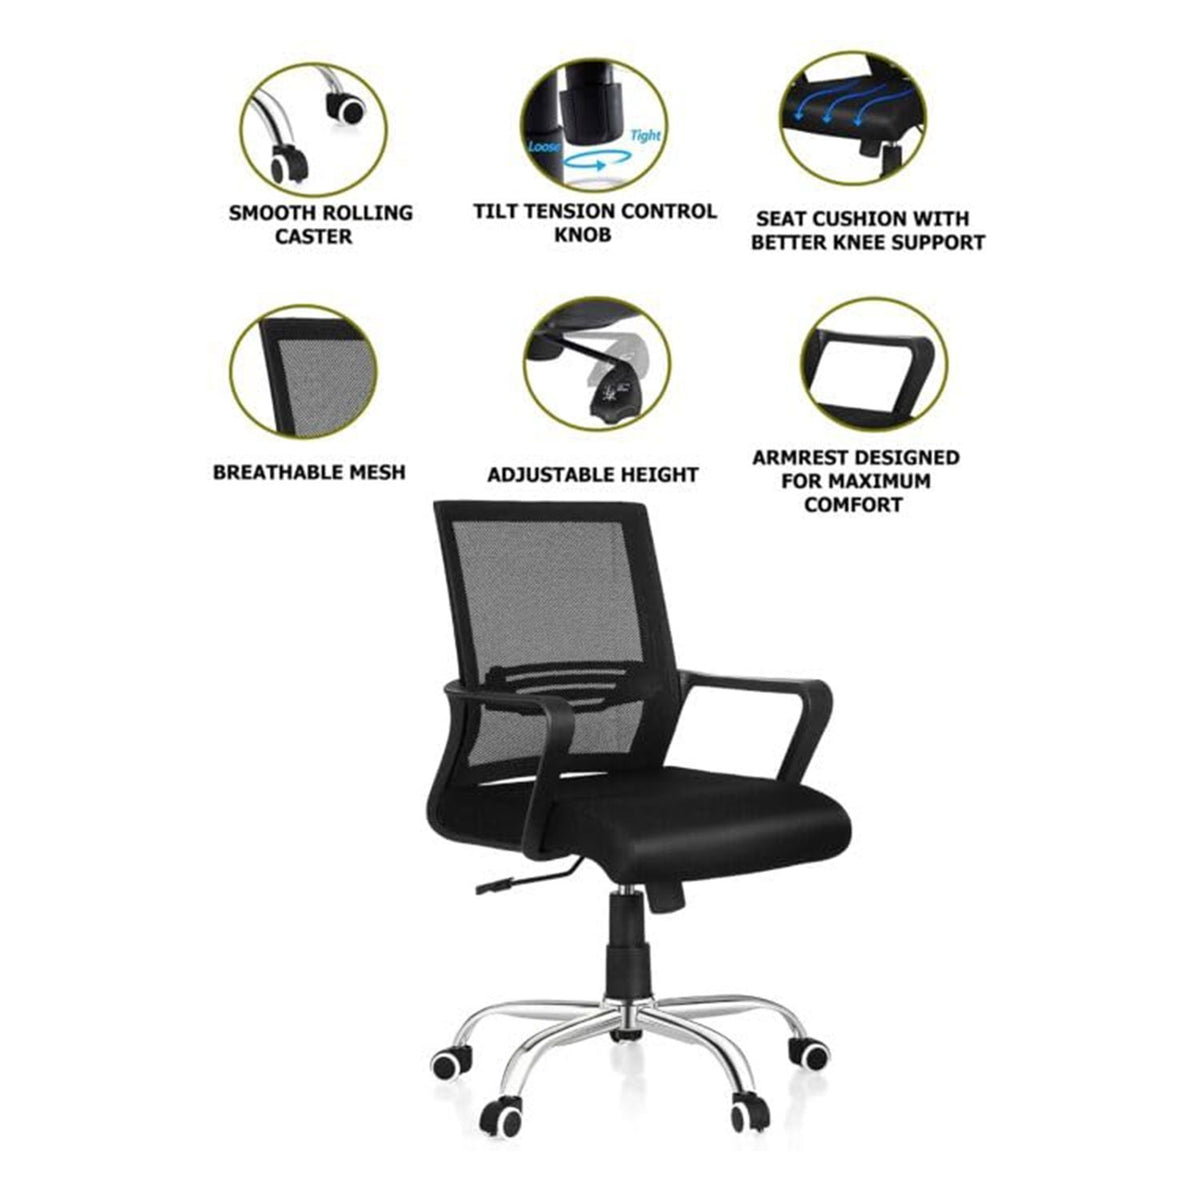 SmileSellers Chorus Nylon Mesh Mid-Back Ergonomic Desk Office Chair with Tilting Mechanism, Comfortable Seat, and Revolving Heavy Duty Metal Base | Ideal for Work from Home & Study